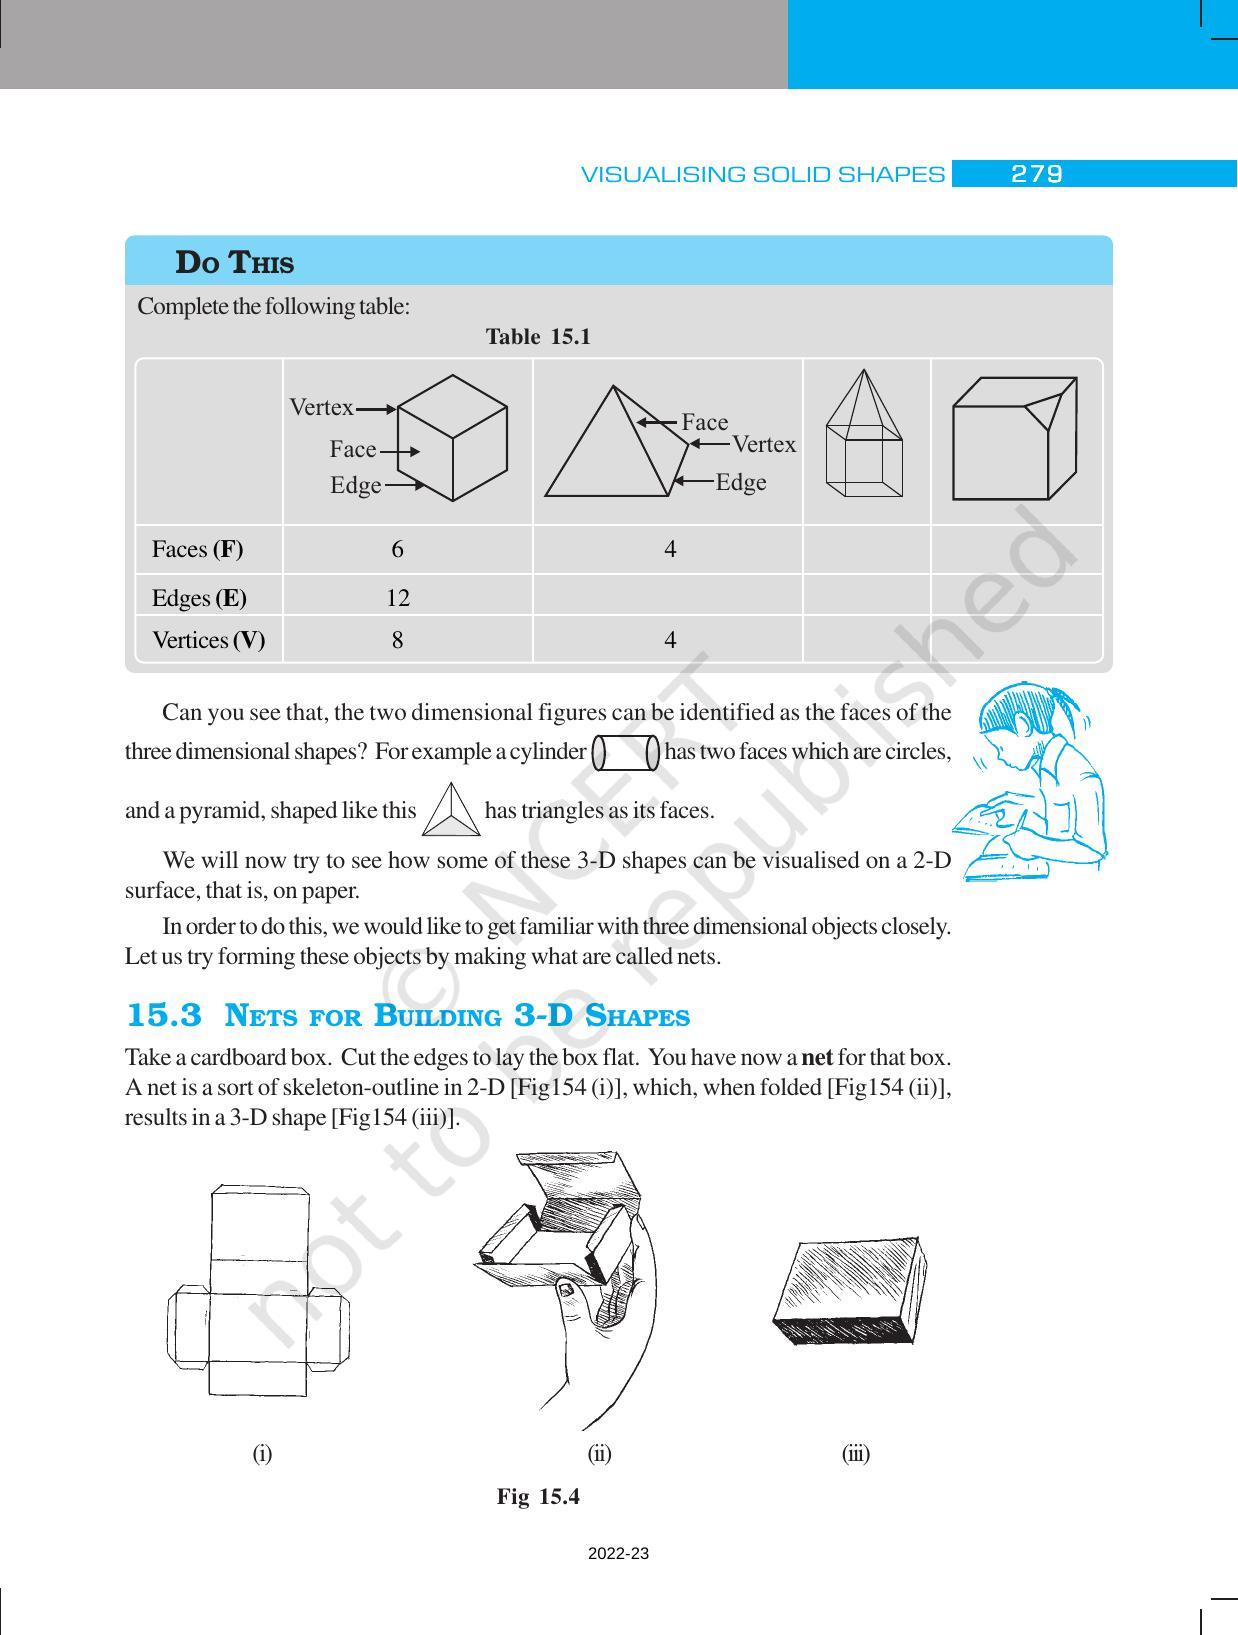 NCERT Book for Class 7 Maths: Chapter 15-Visualising Solid Shapes - Page 3